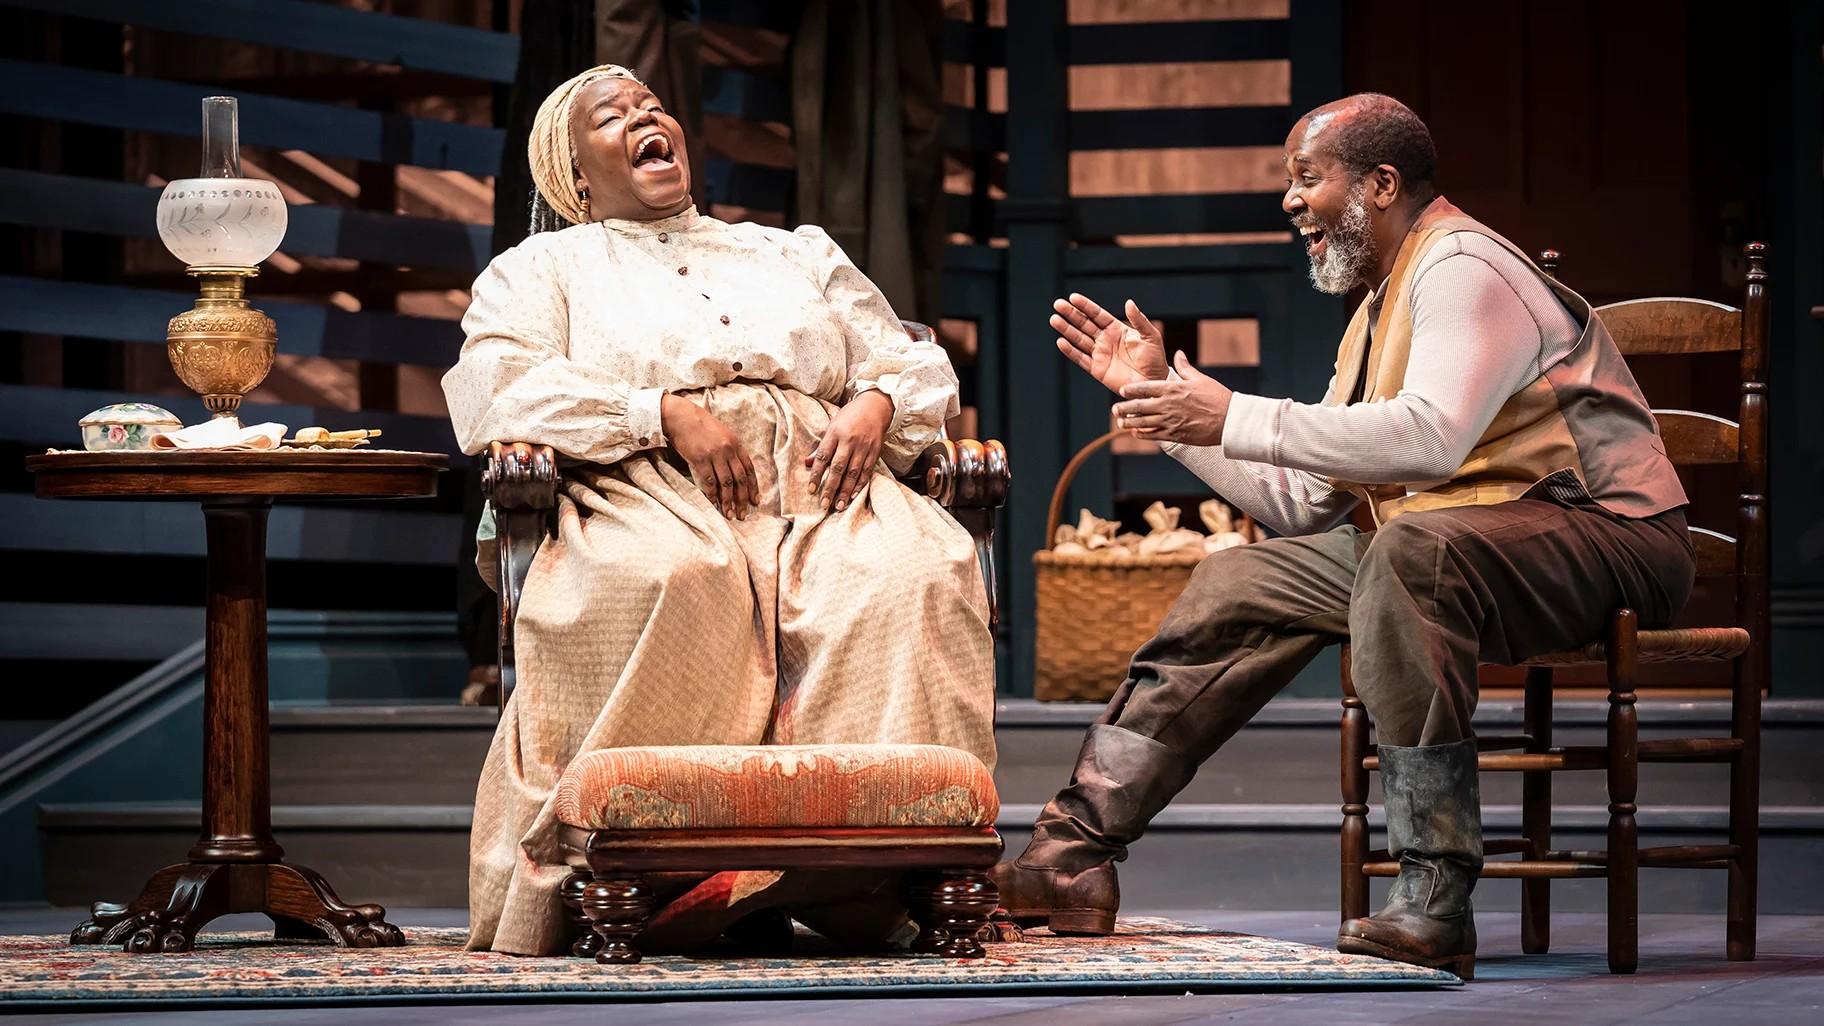 Lisa Gaye Dixon (Aunt Ester) and James A. Williams (Solly Two Kings) in August Wilson’s “Gem of the Ocean” at the Goodman Theatre. (Liz Lauren photo) 